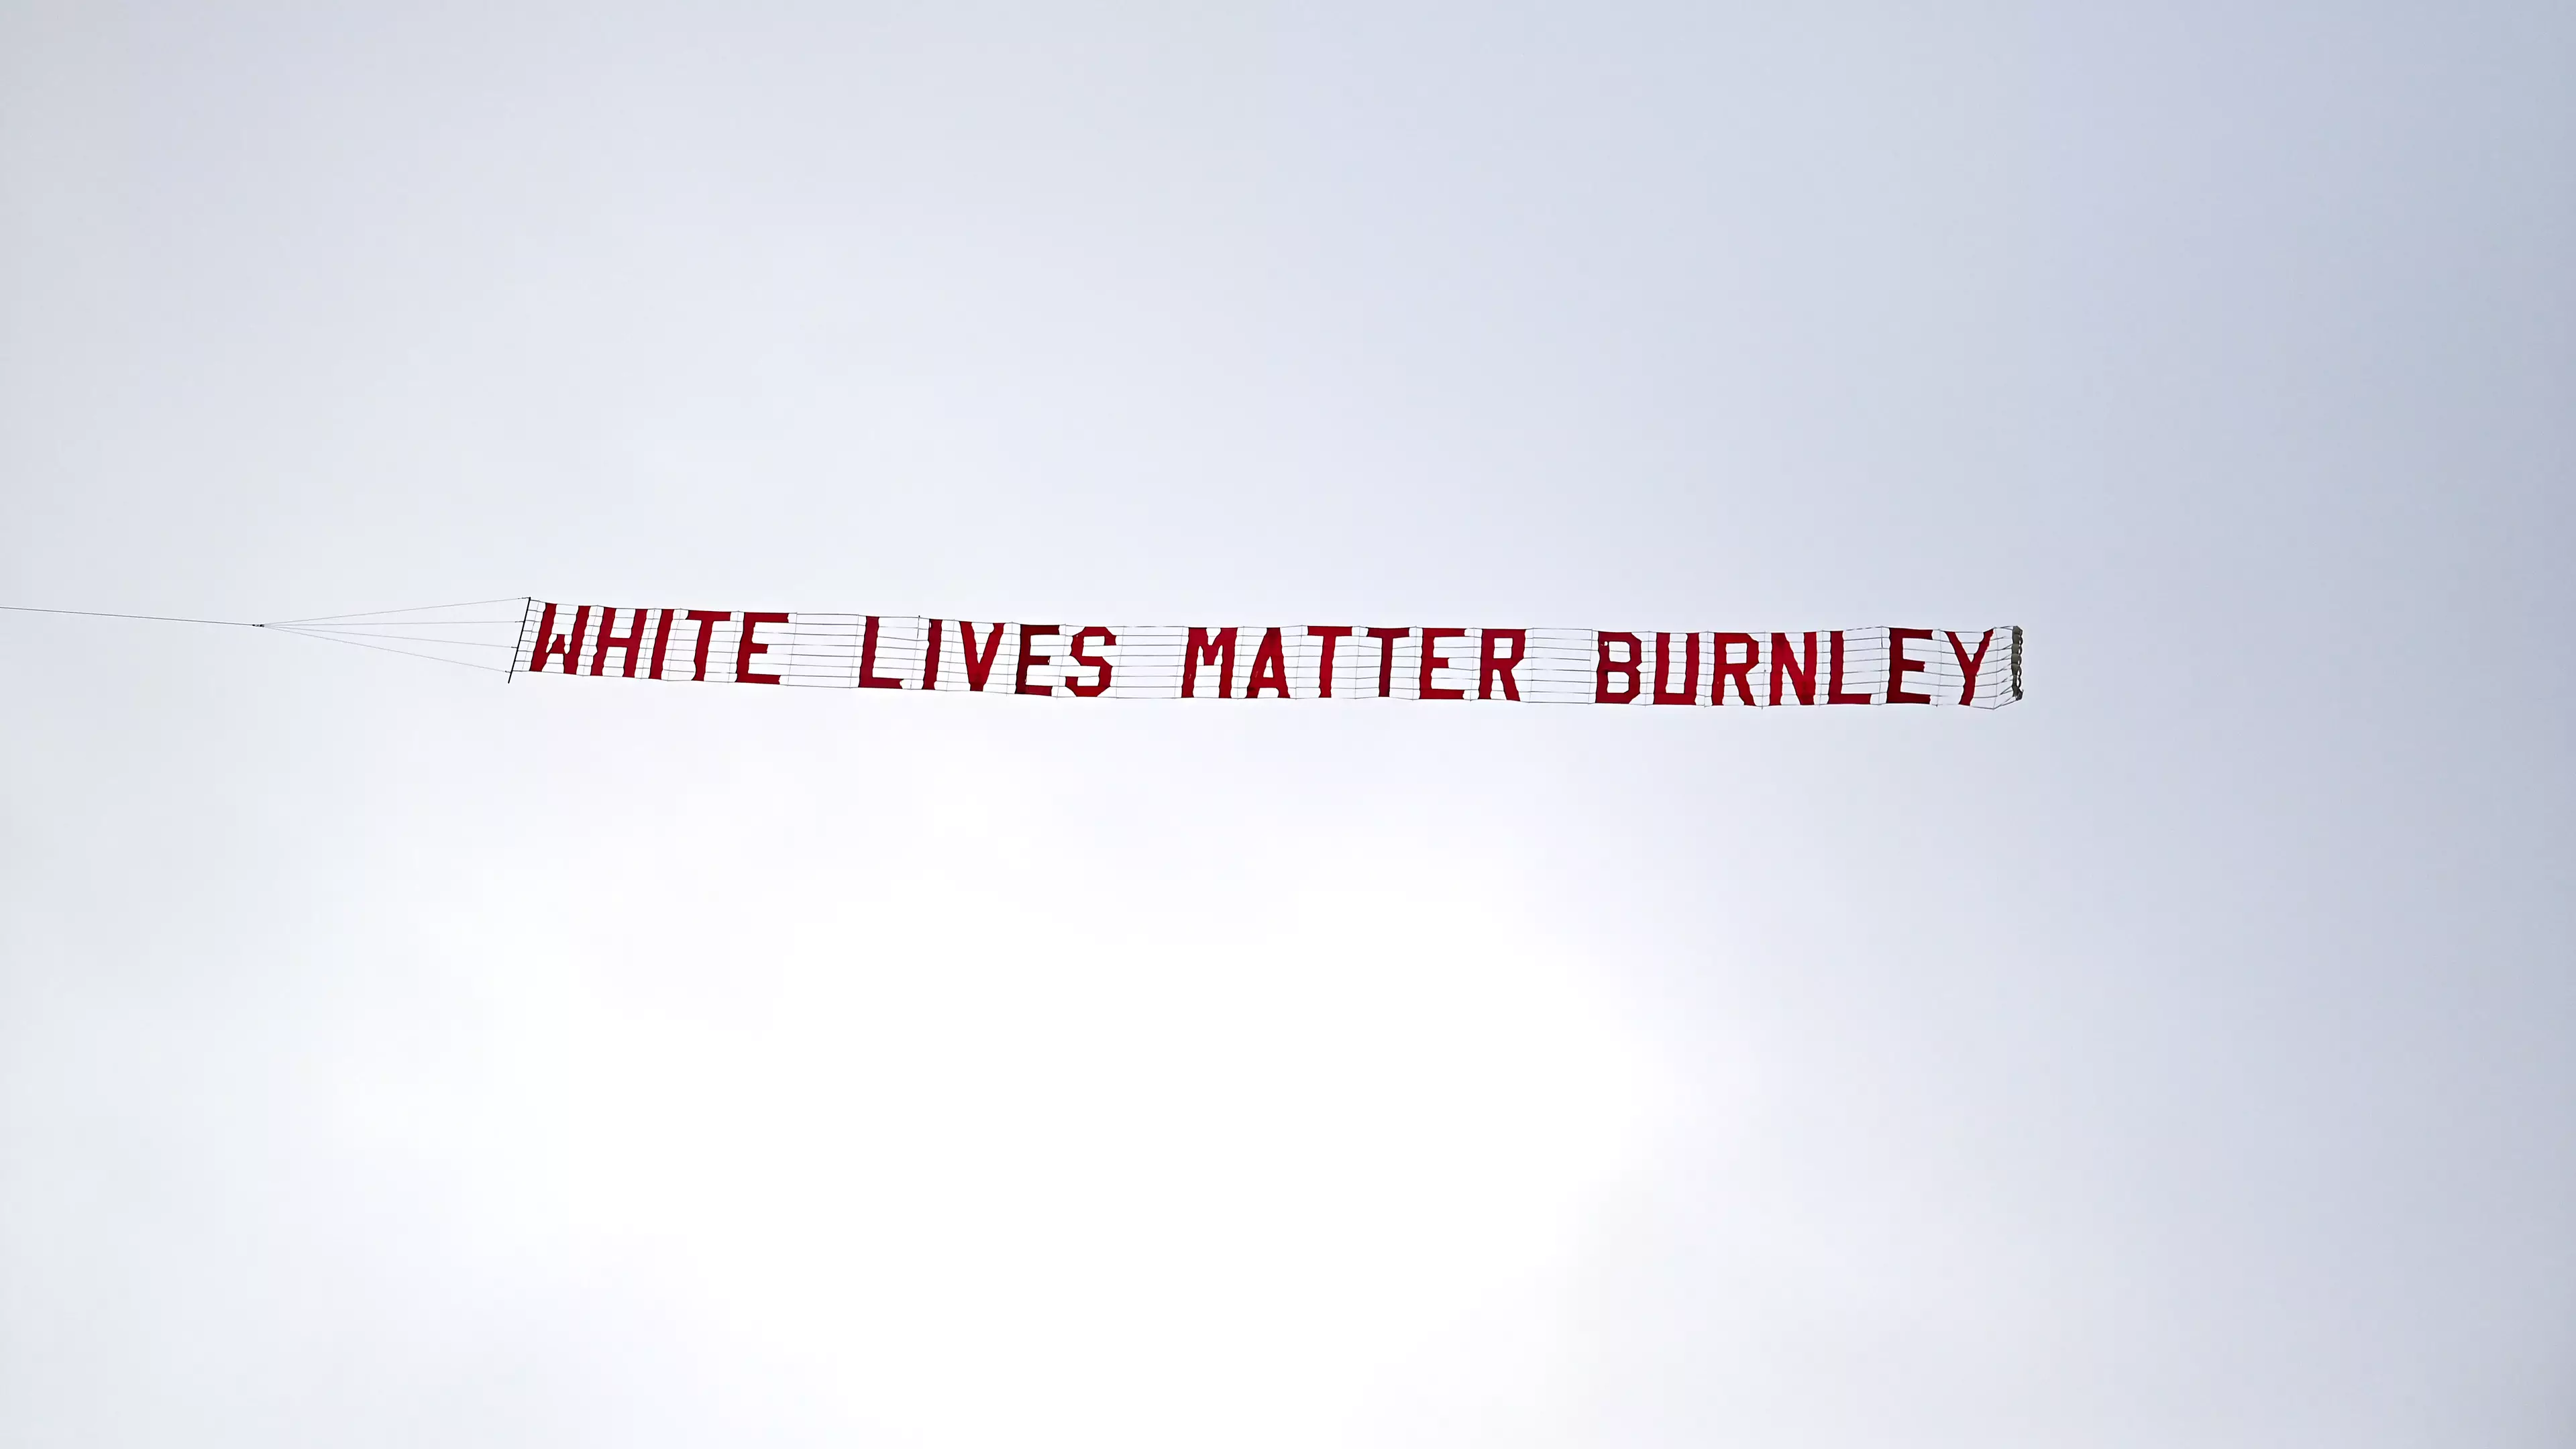 Police Find 'No Criminal Offences' Committed In 'White Lives Matter Burnley' Banner Incident